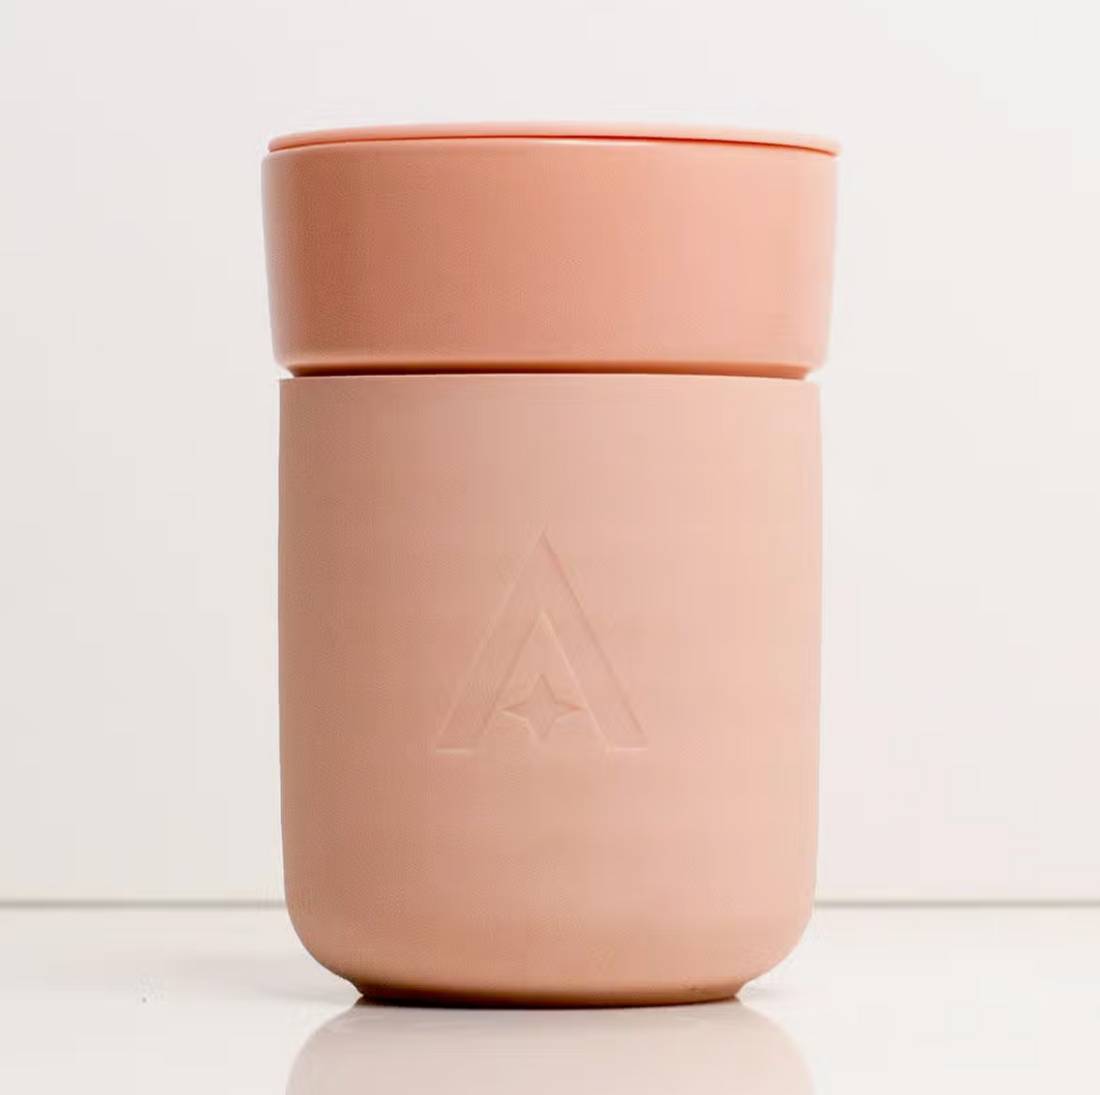 Ceramic Carry Cup - Blush Pink